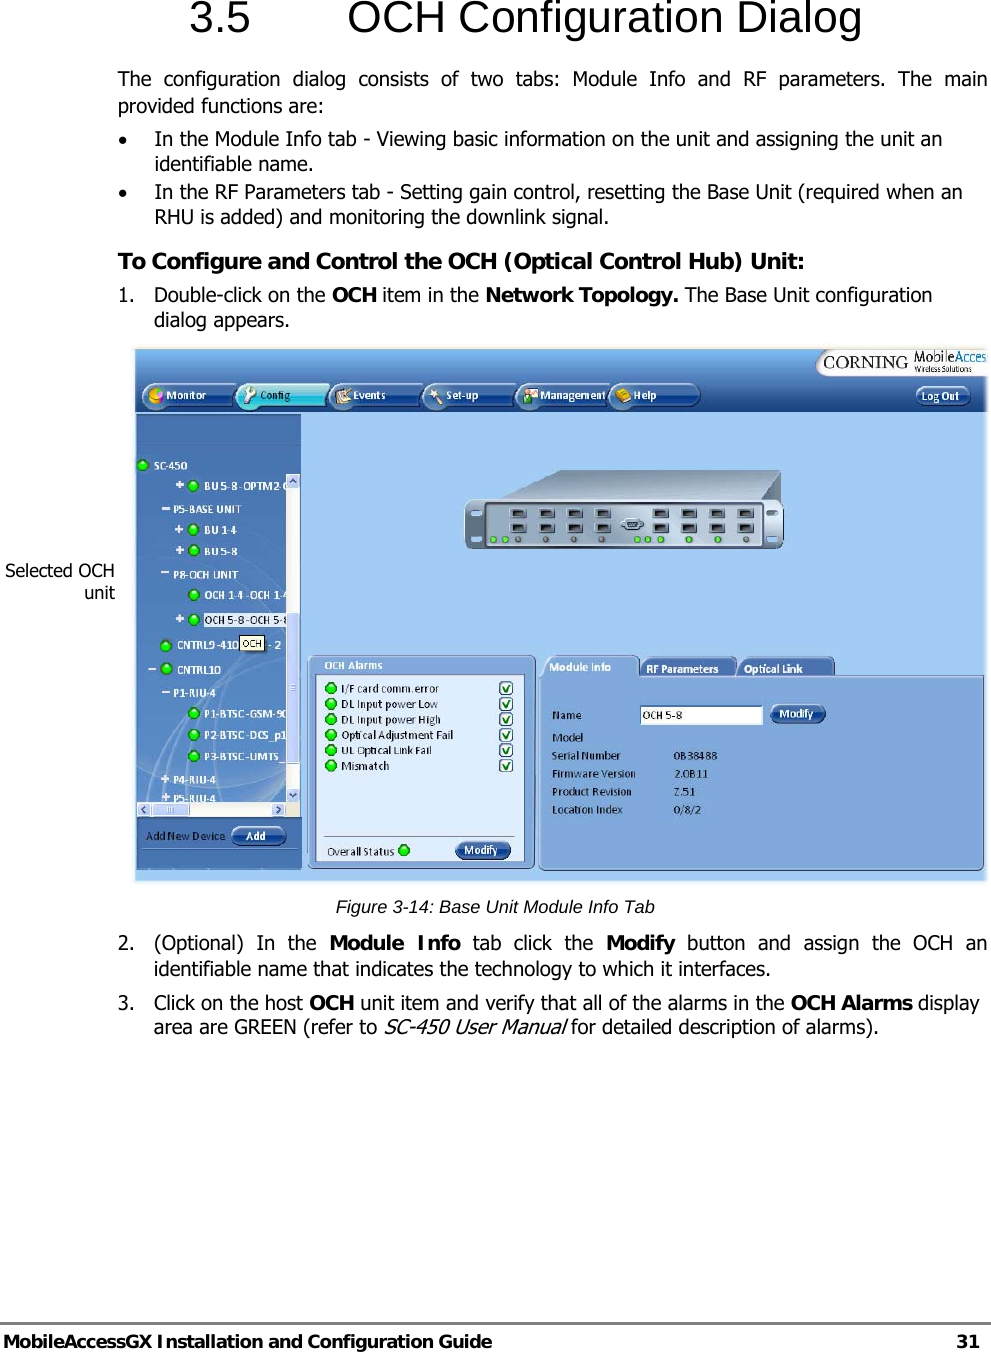   MobileAccessGX Installation and Configuration Guide   31  3.5  OCH Configuration Dialog The configuration dialog consists of two tabs: Module Info and RF parameters. The main provided functions are: • In the Module Info tab - Viewing basic information on the unit and assigning the unit an identifiable name. • In the RF Parameters tab - Setting gain control, resetting the Base Unit (required when an RHU is added) and monitoring the downlink signal. To Configure and Control the OCH (Optical Control Hub) Unit: 1.  Double-click on the OCH item in the Network Topology. The Base Unit configuration dialog appears.  Figure 3-14: Base Unit Module Info Tab 2.  (Optional) In the Module Info tab click the Modify button and assign the OCH an identifiable name that indicates the technology to which it interfaces. 3.  Click on the host OCH unit item and verify that all of the alarms in the OCH Alarms display area are GREEN (refer to SC-450 User Manual for detailed description of alarms). Selected OCH unit